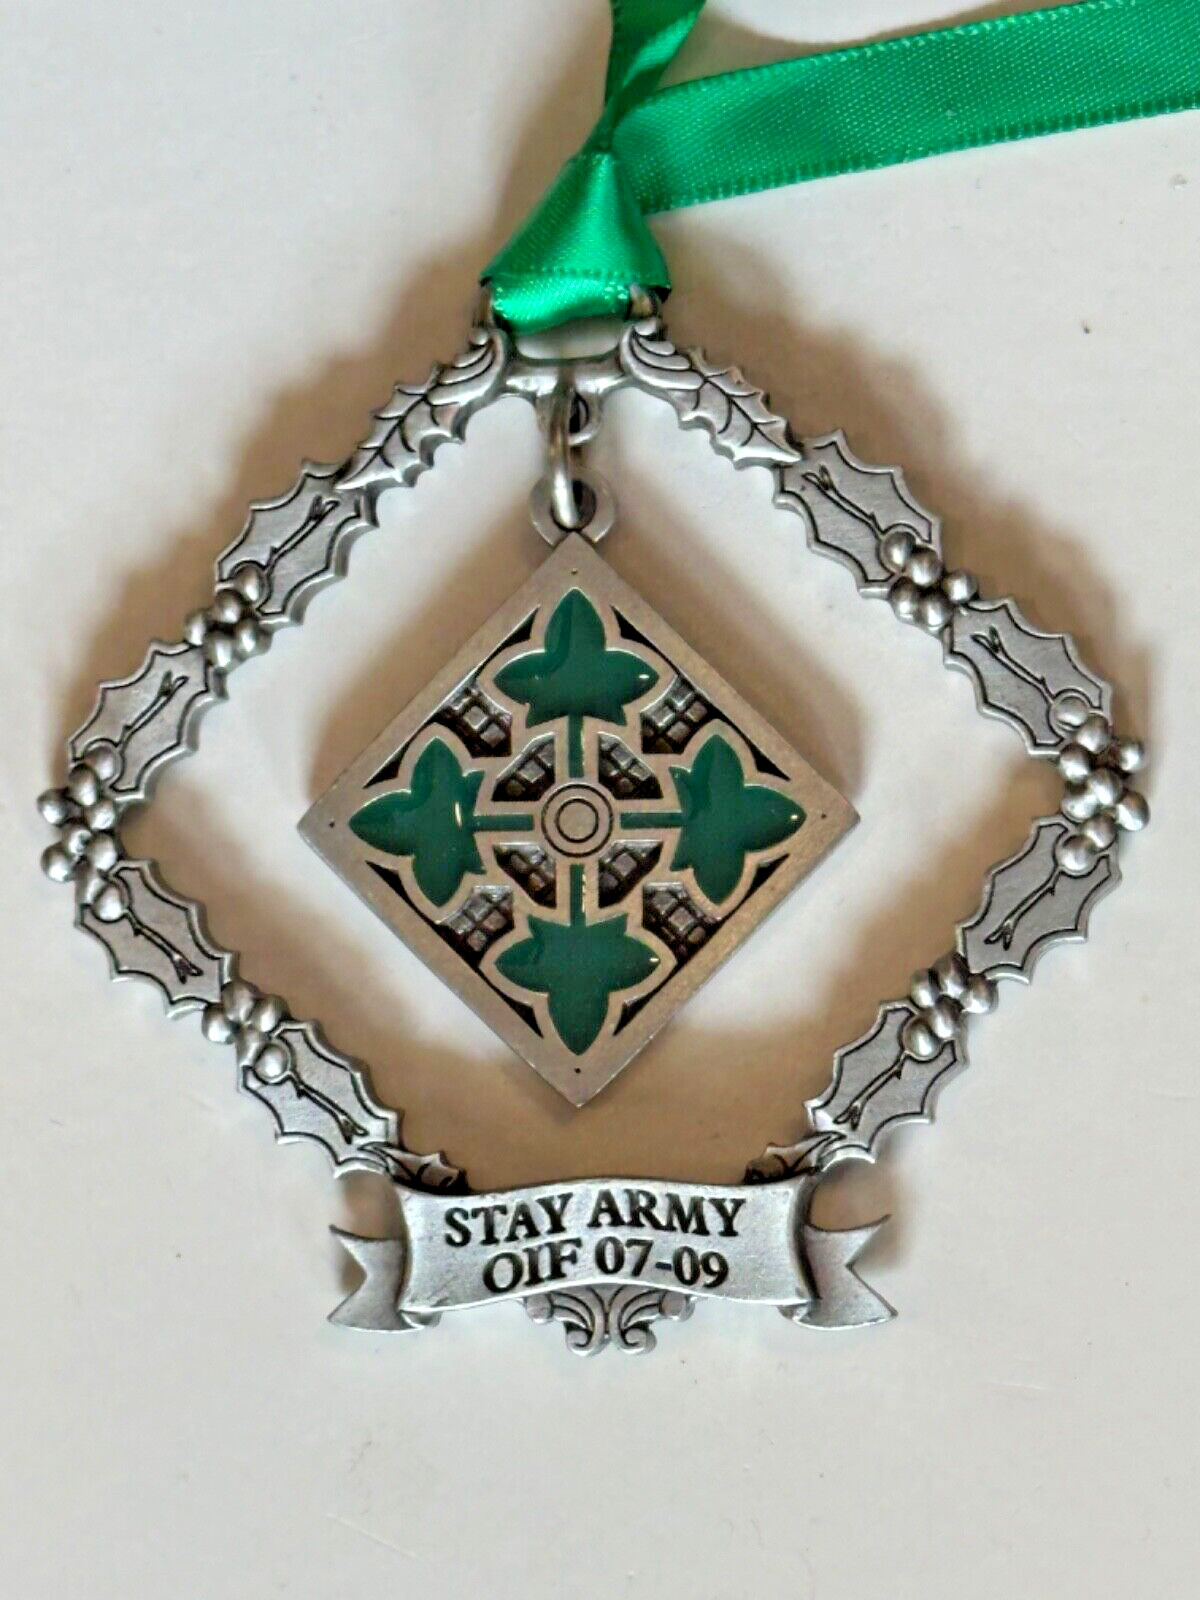 4th Infantry Division OIF 07-09 STAY ARMY Metal Ornament